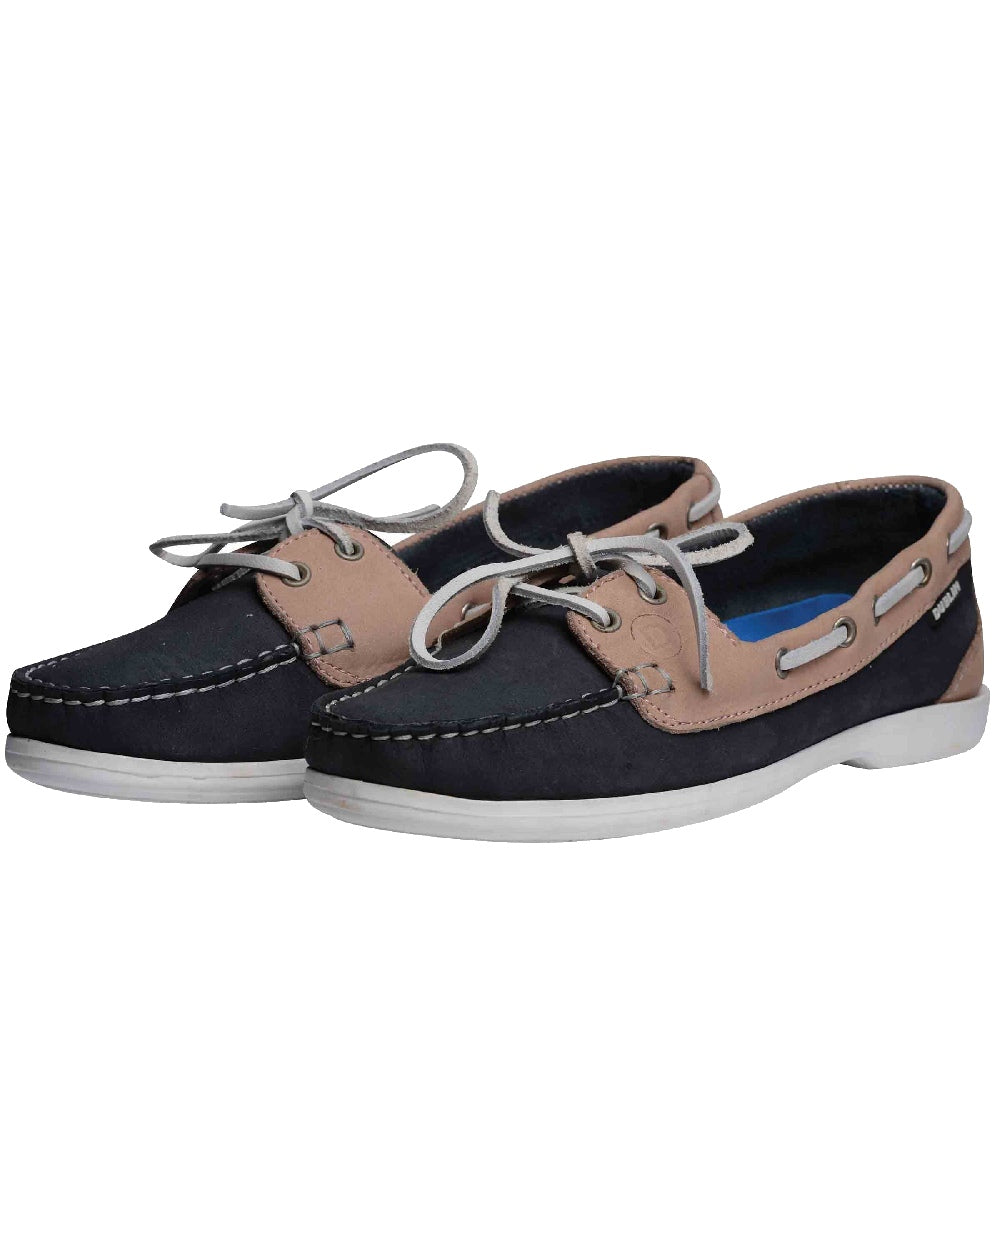 Dublin Millfield Arena Shoes in Navy Pink 